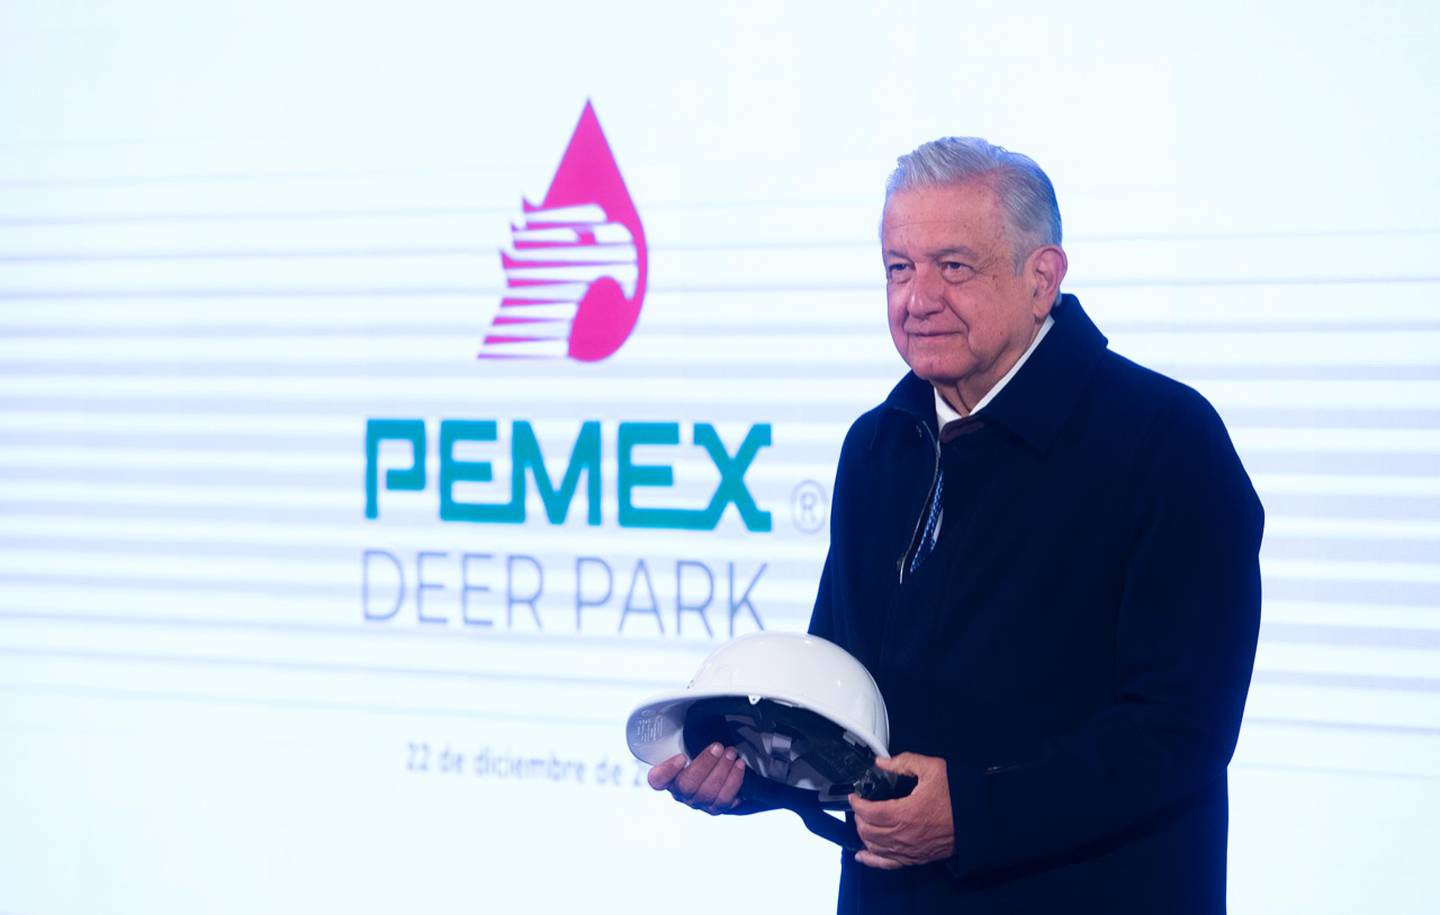 President Andres Manuel Lopez Obrador, known as AMLO, has made strengthening Mexico’s state energy companies at the expense of private firms the hallmark of his administration.